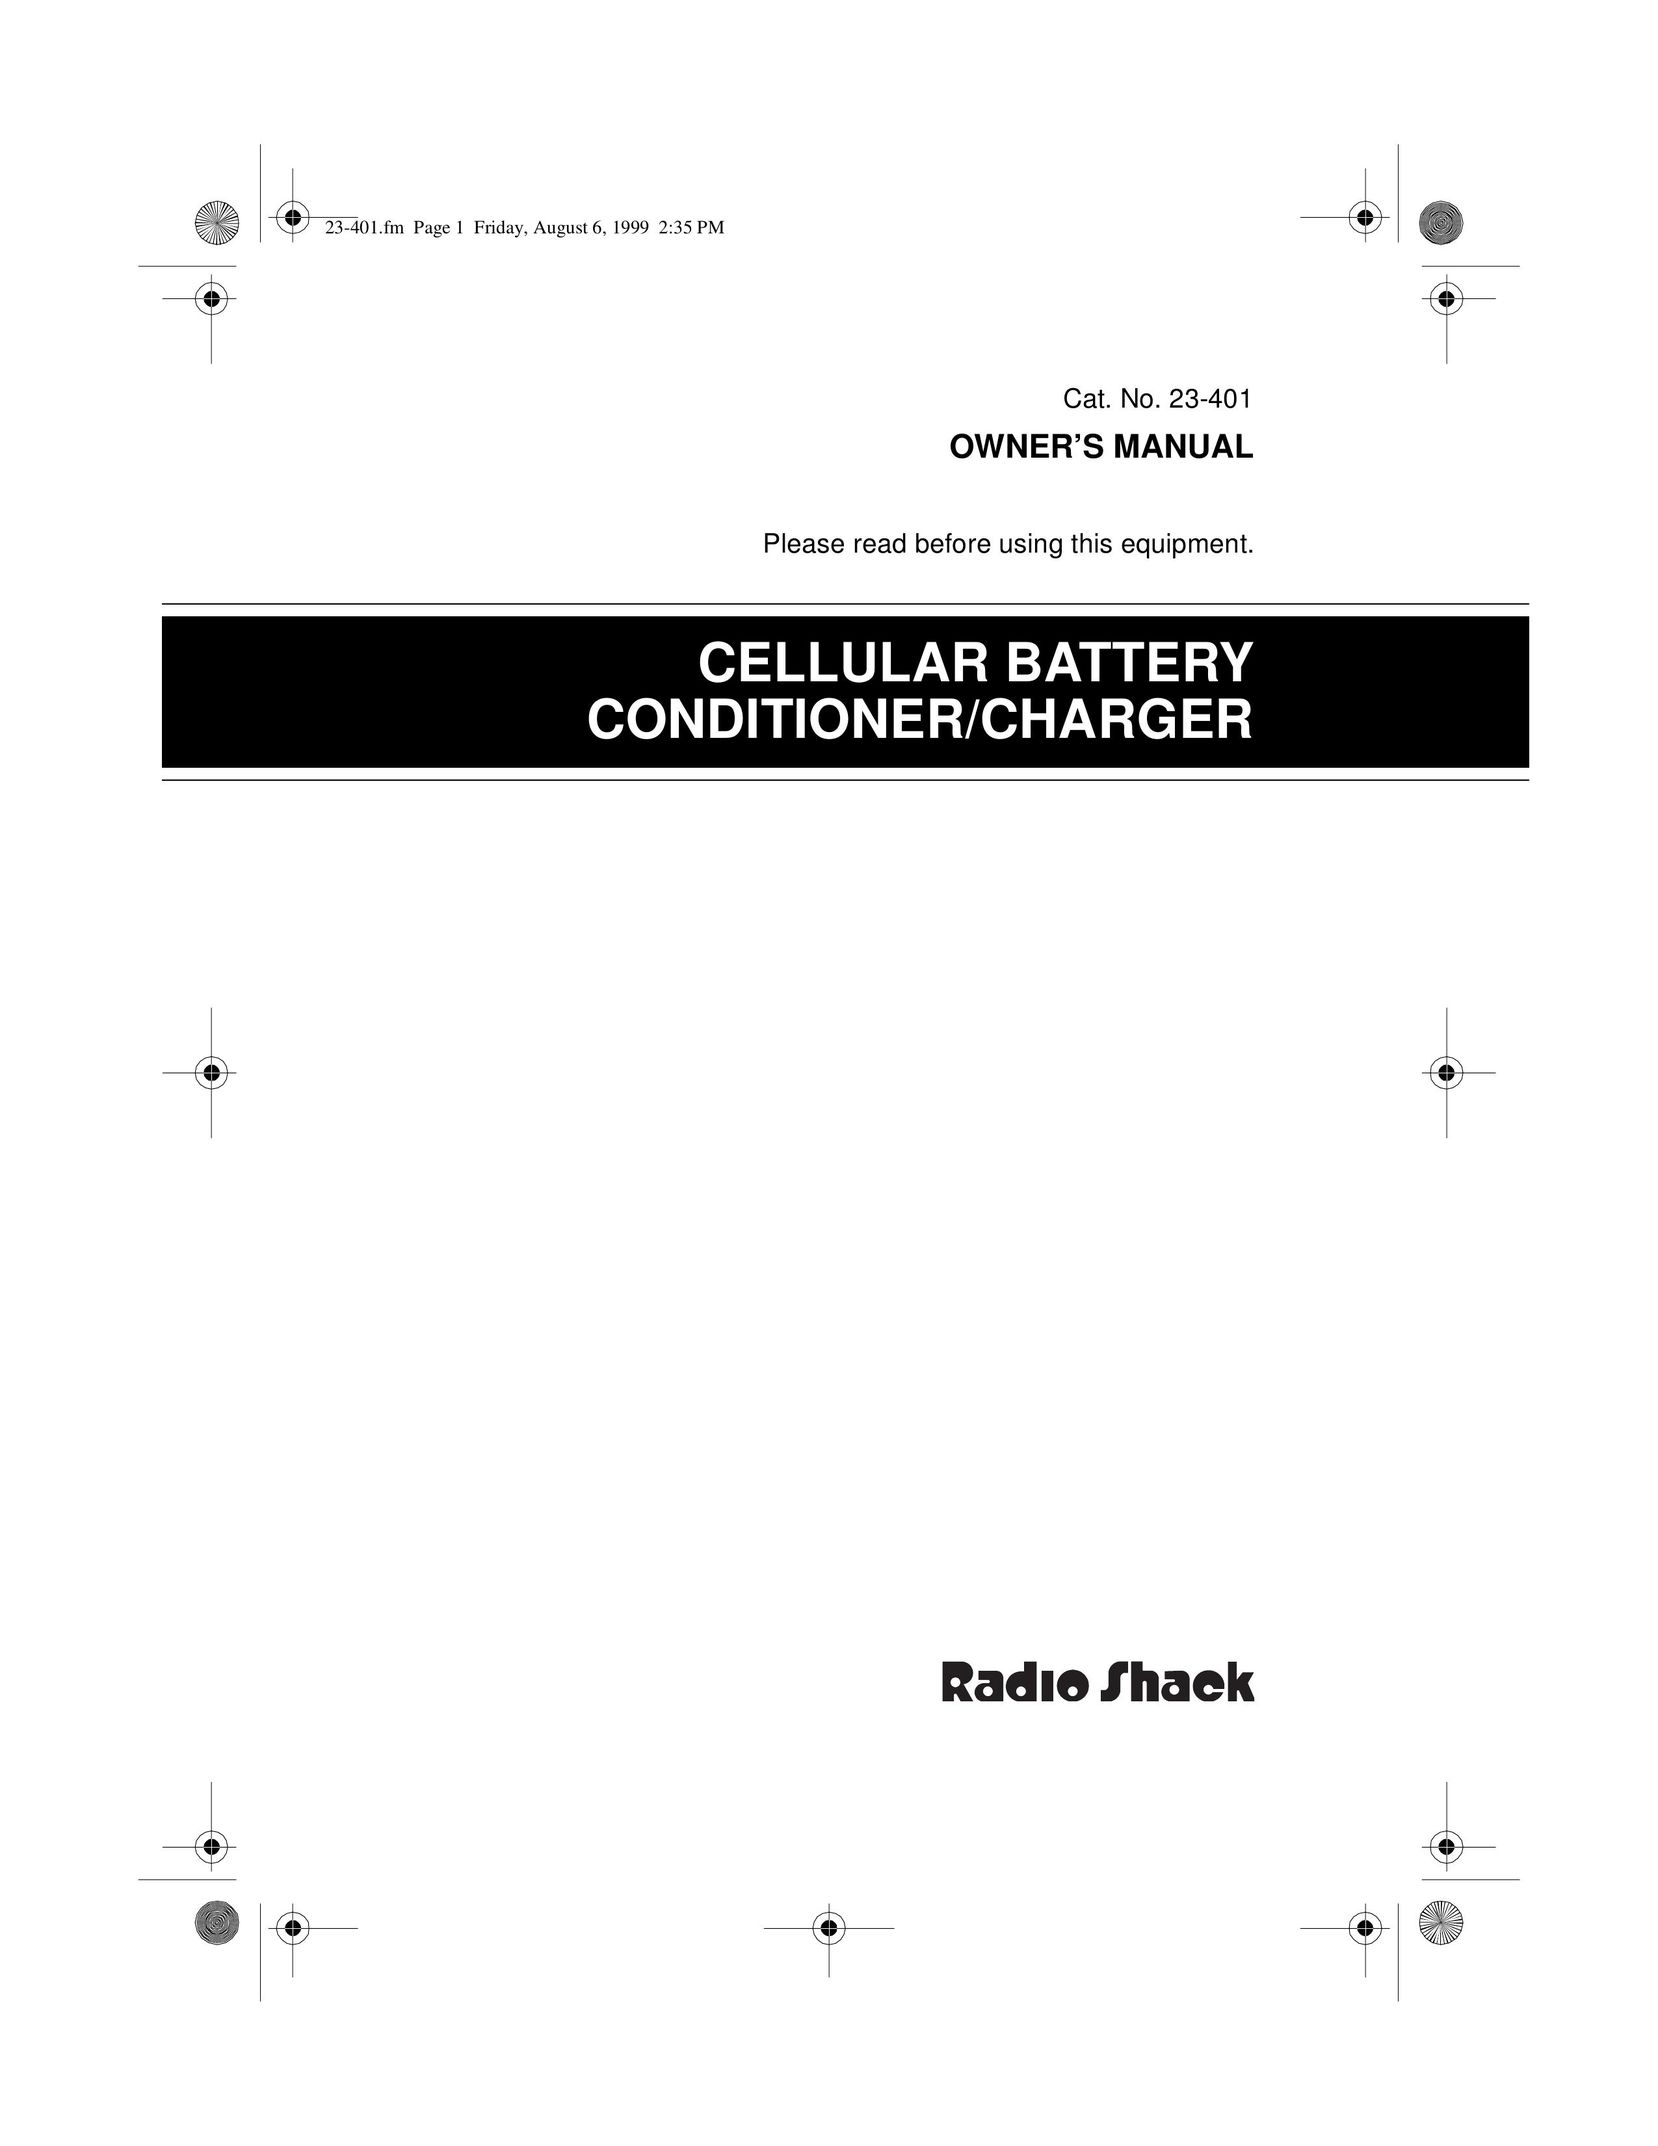 Tandy 23-401 Cell Phone Accessories User Manual